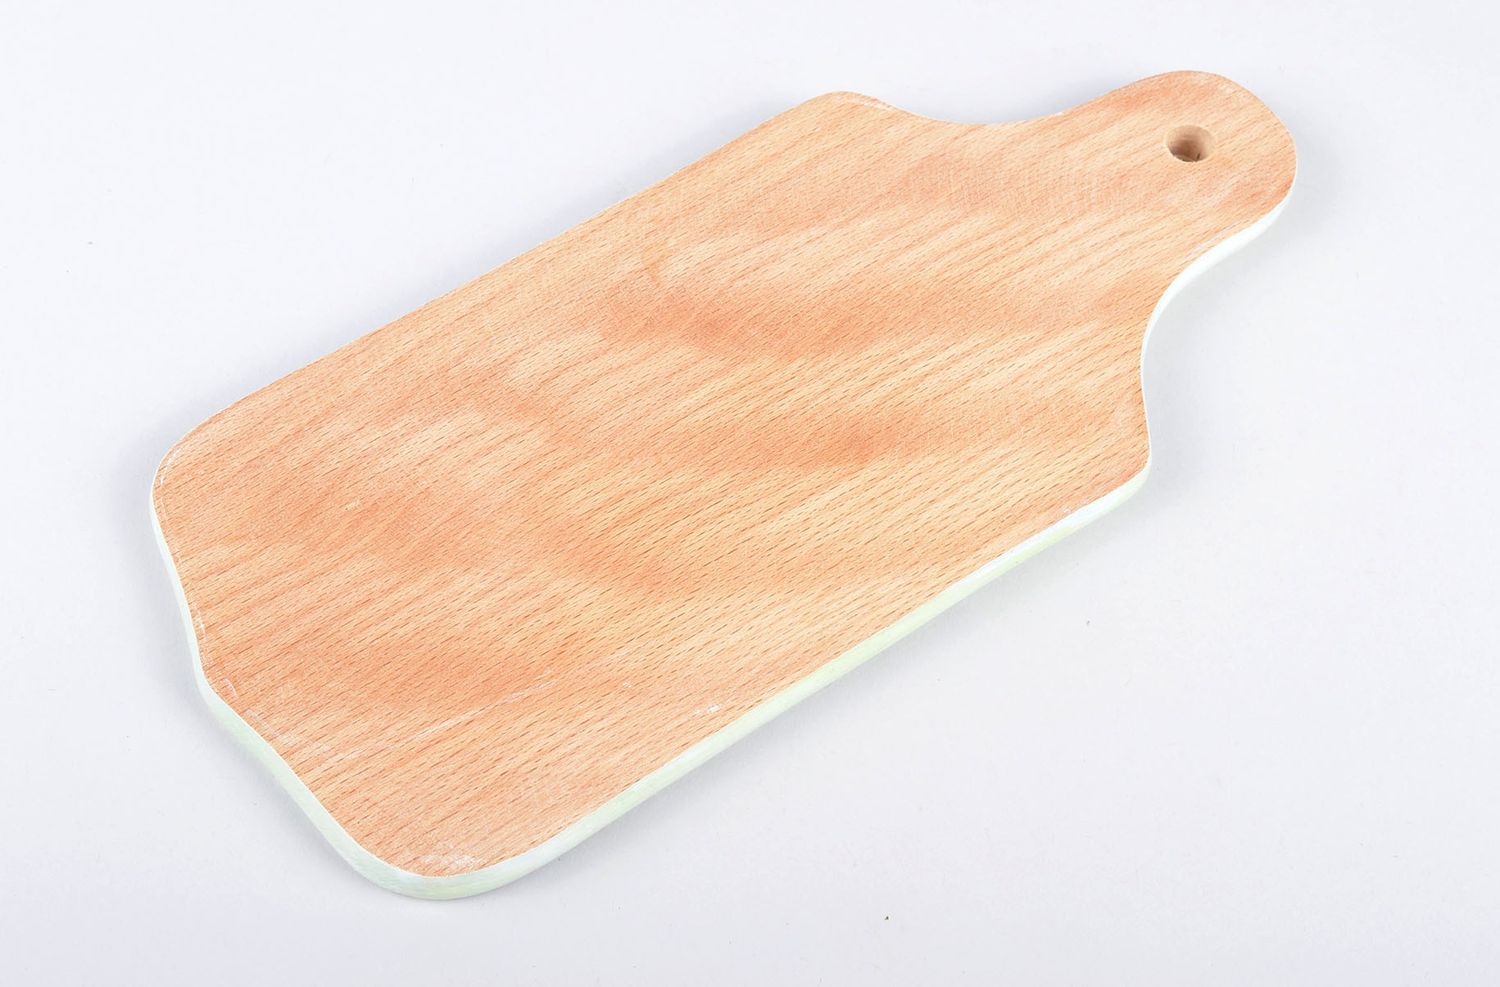 Handmade wooden cutting board chopping board for decorative use only gift ideas photo 2